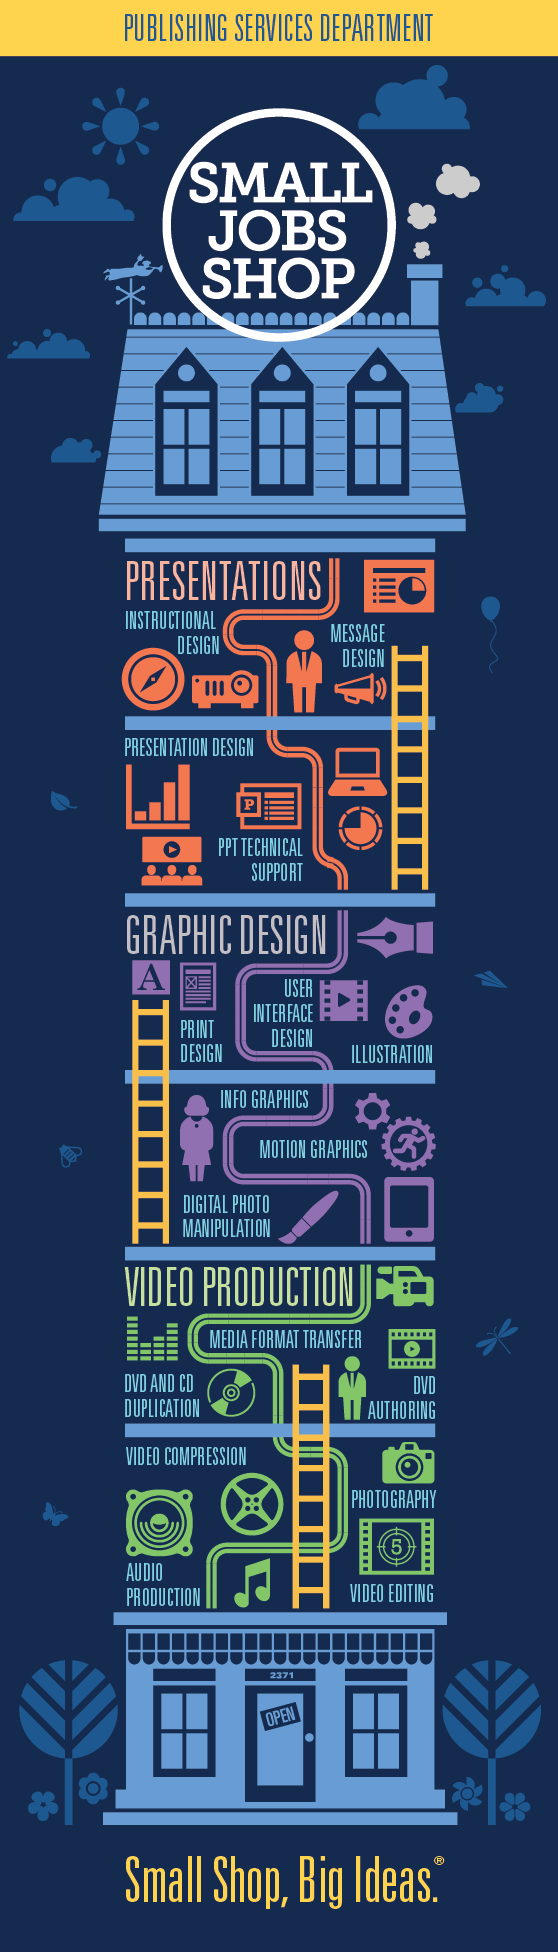 design infographic Icon building neil brown